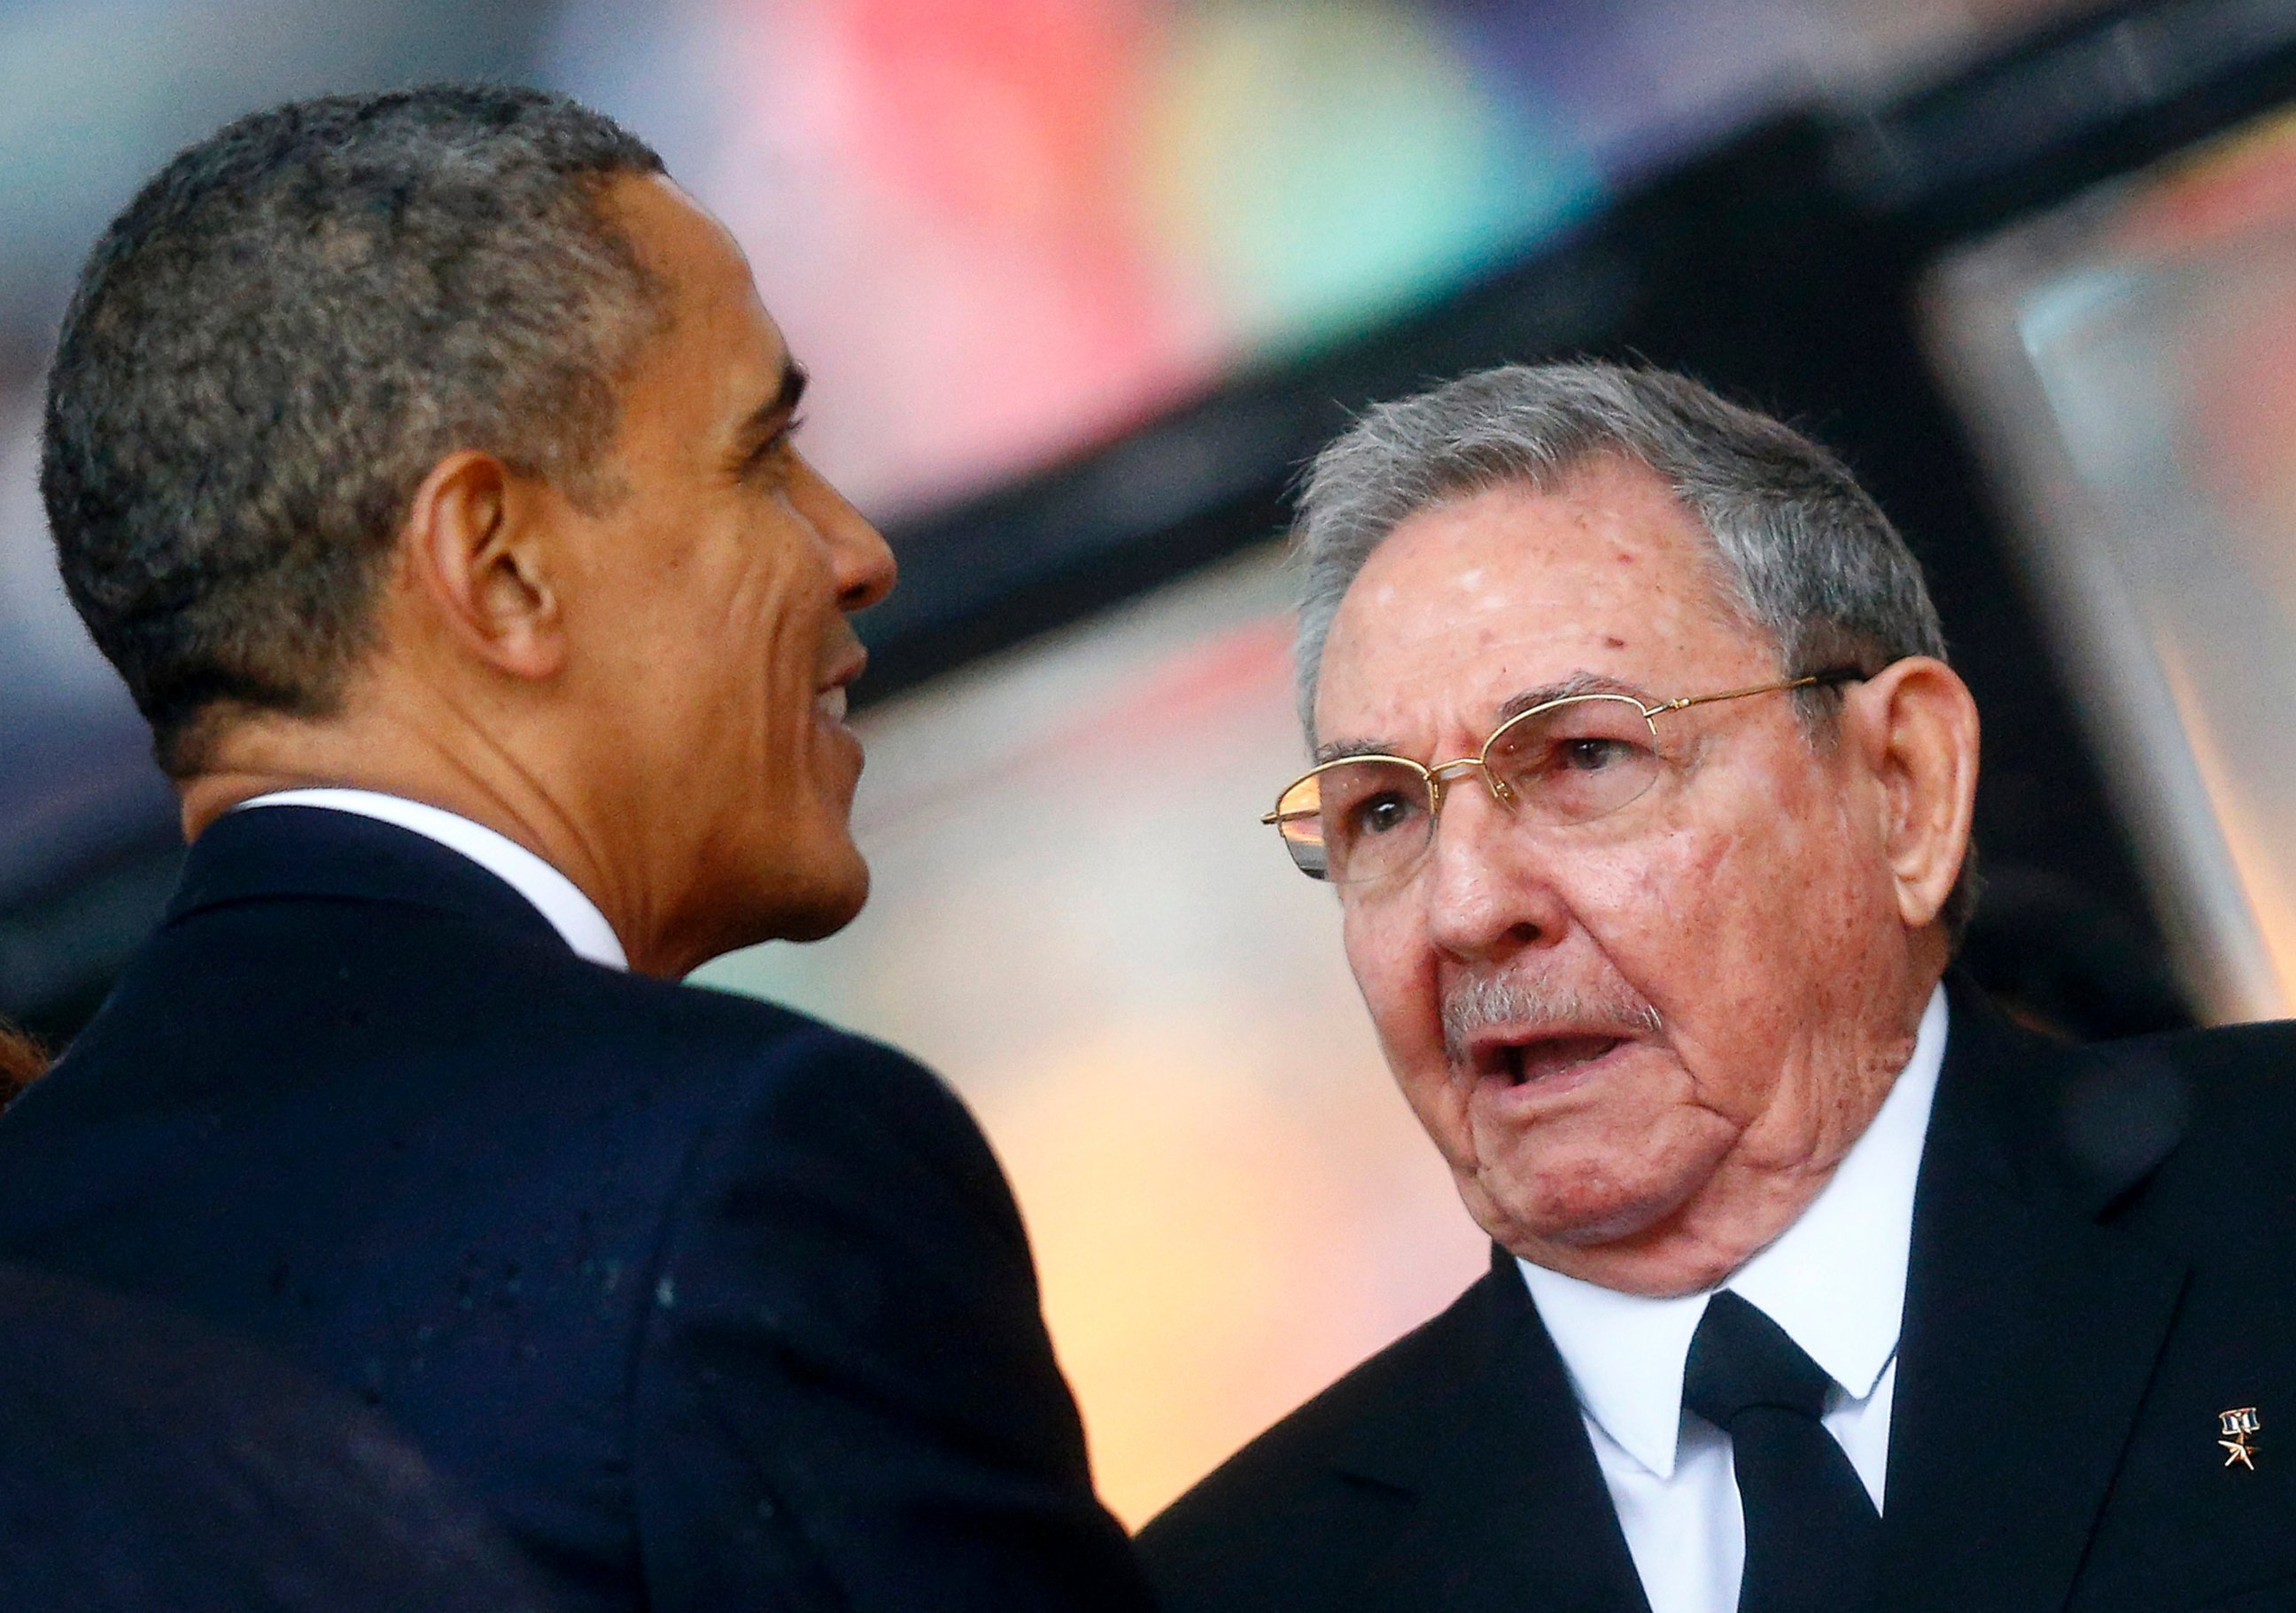 PHOTO: President Barack Obama greets Cuban President Raul Castro before giving his speech at the memorial service for Nelson Mandela at the First National Bank soccer stadium in Johannesburg, Dec. 10, 2013.